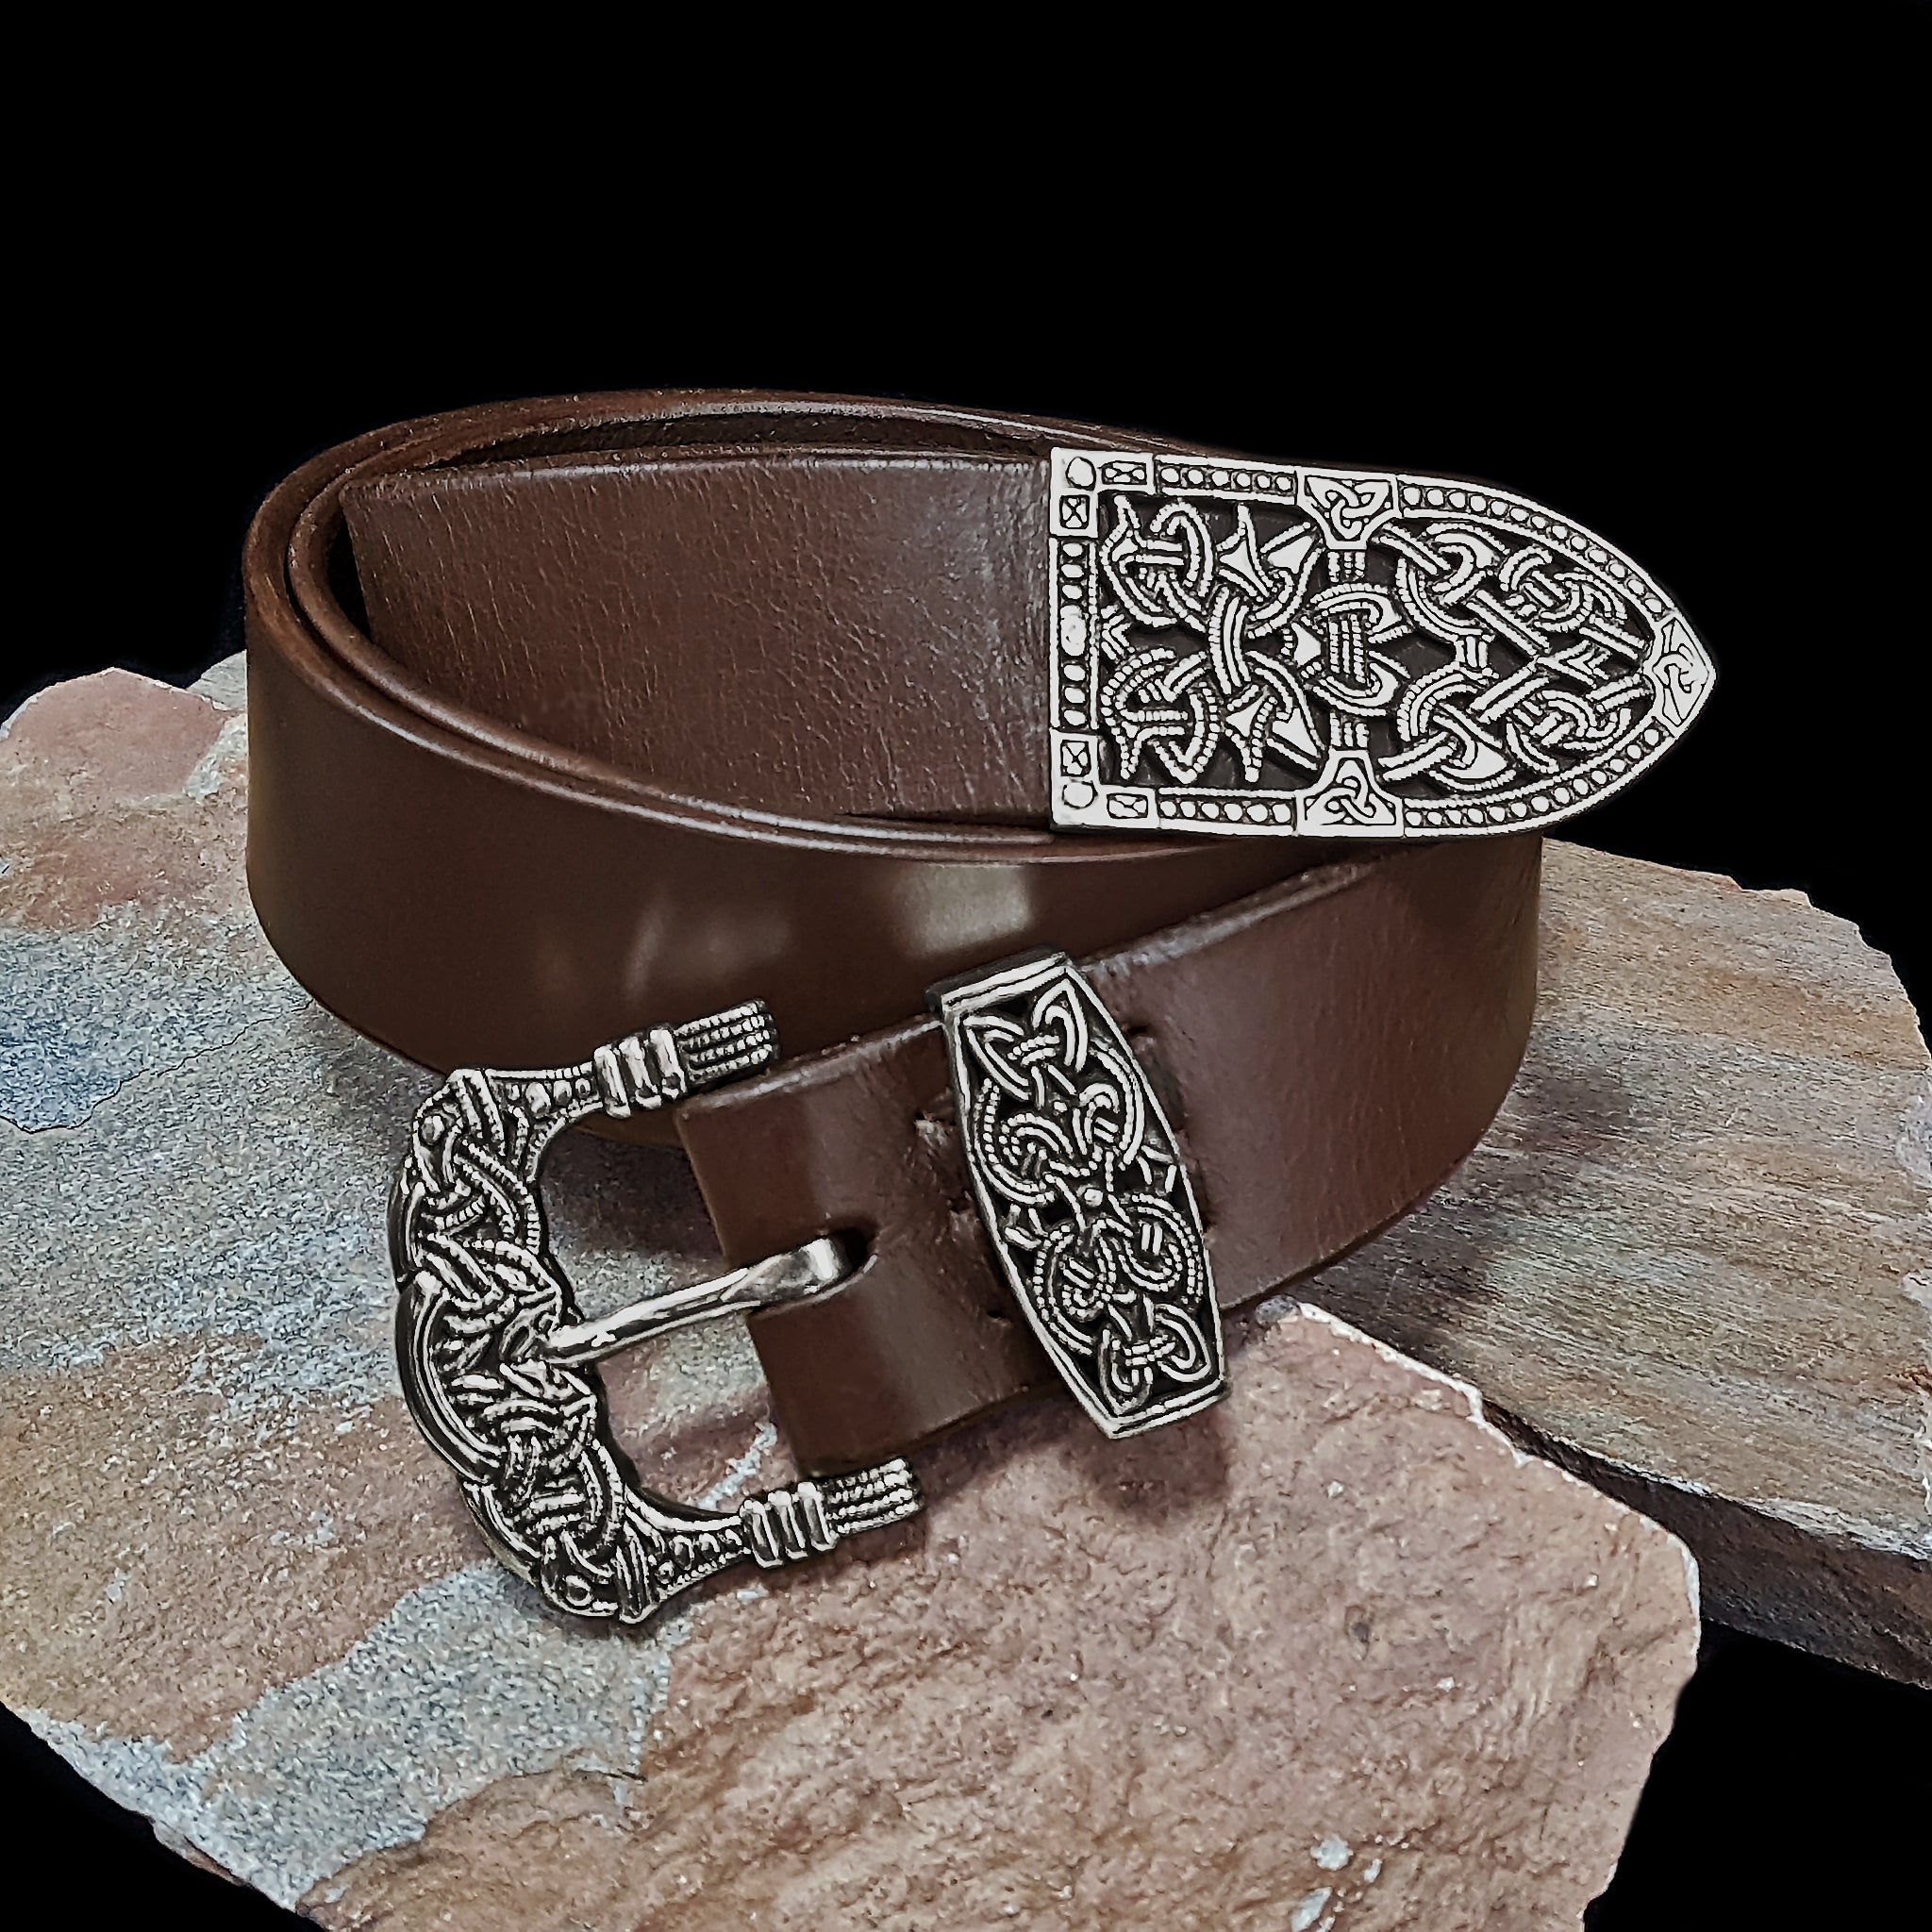 lv belt - Belts Prices and Promotions - Fashion Accessories Nov